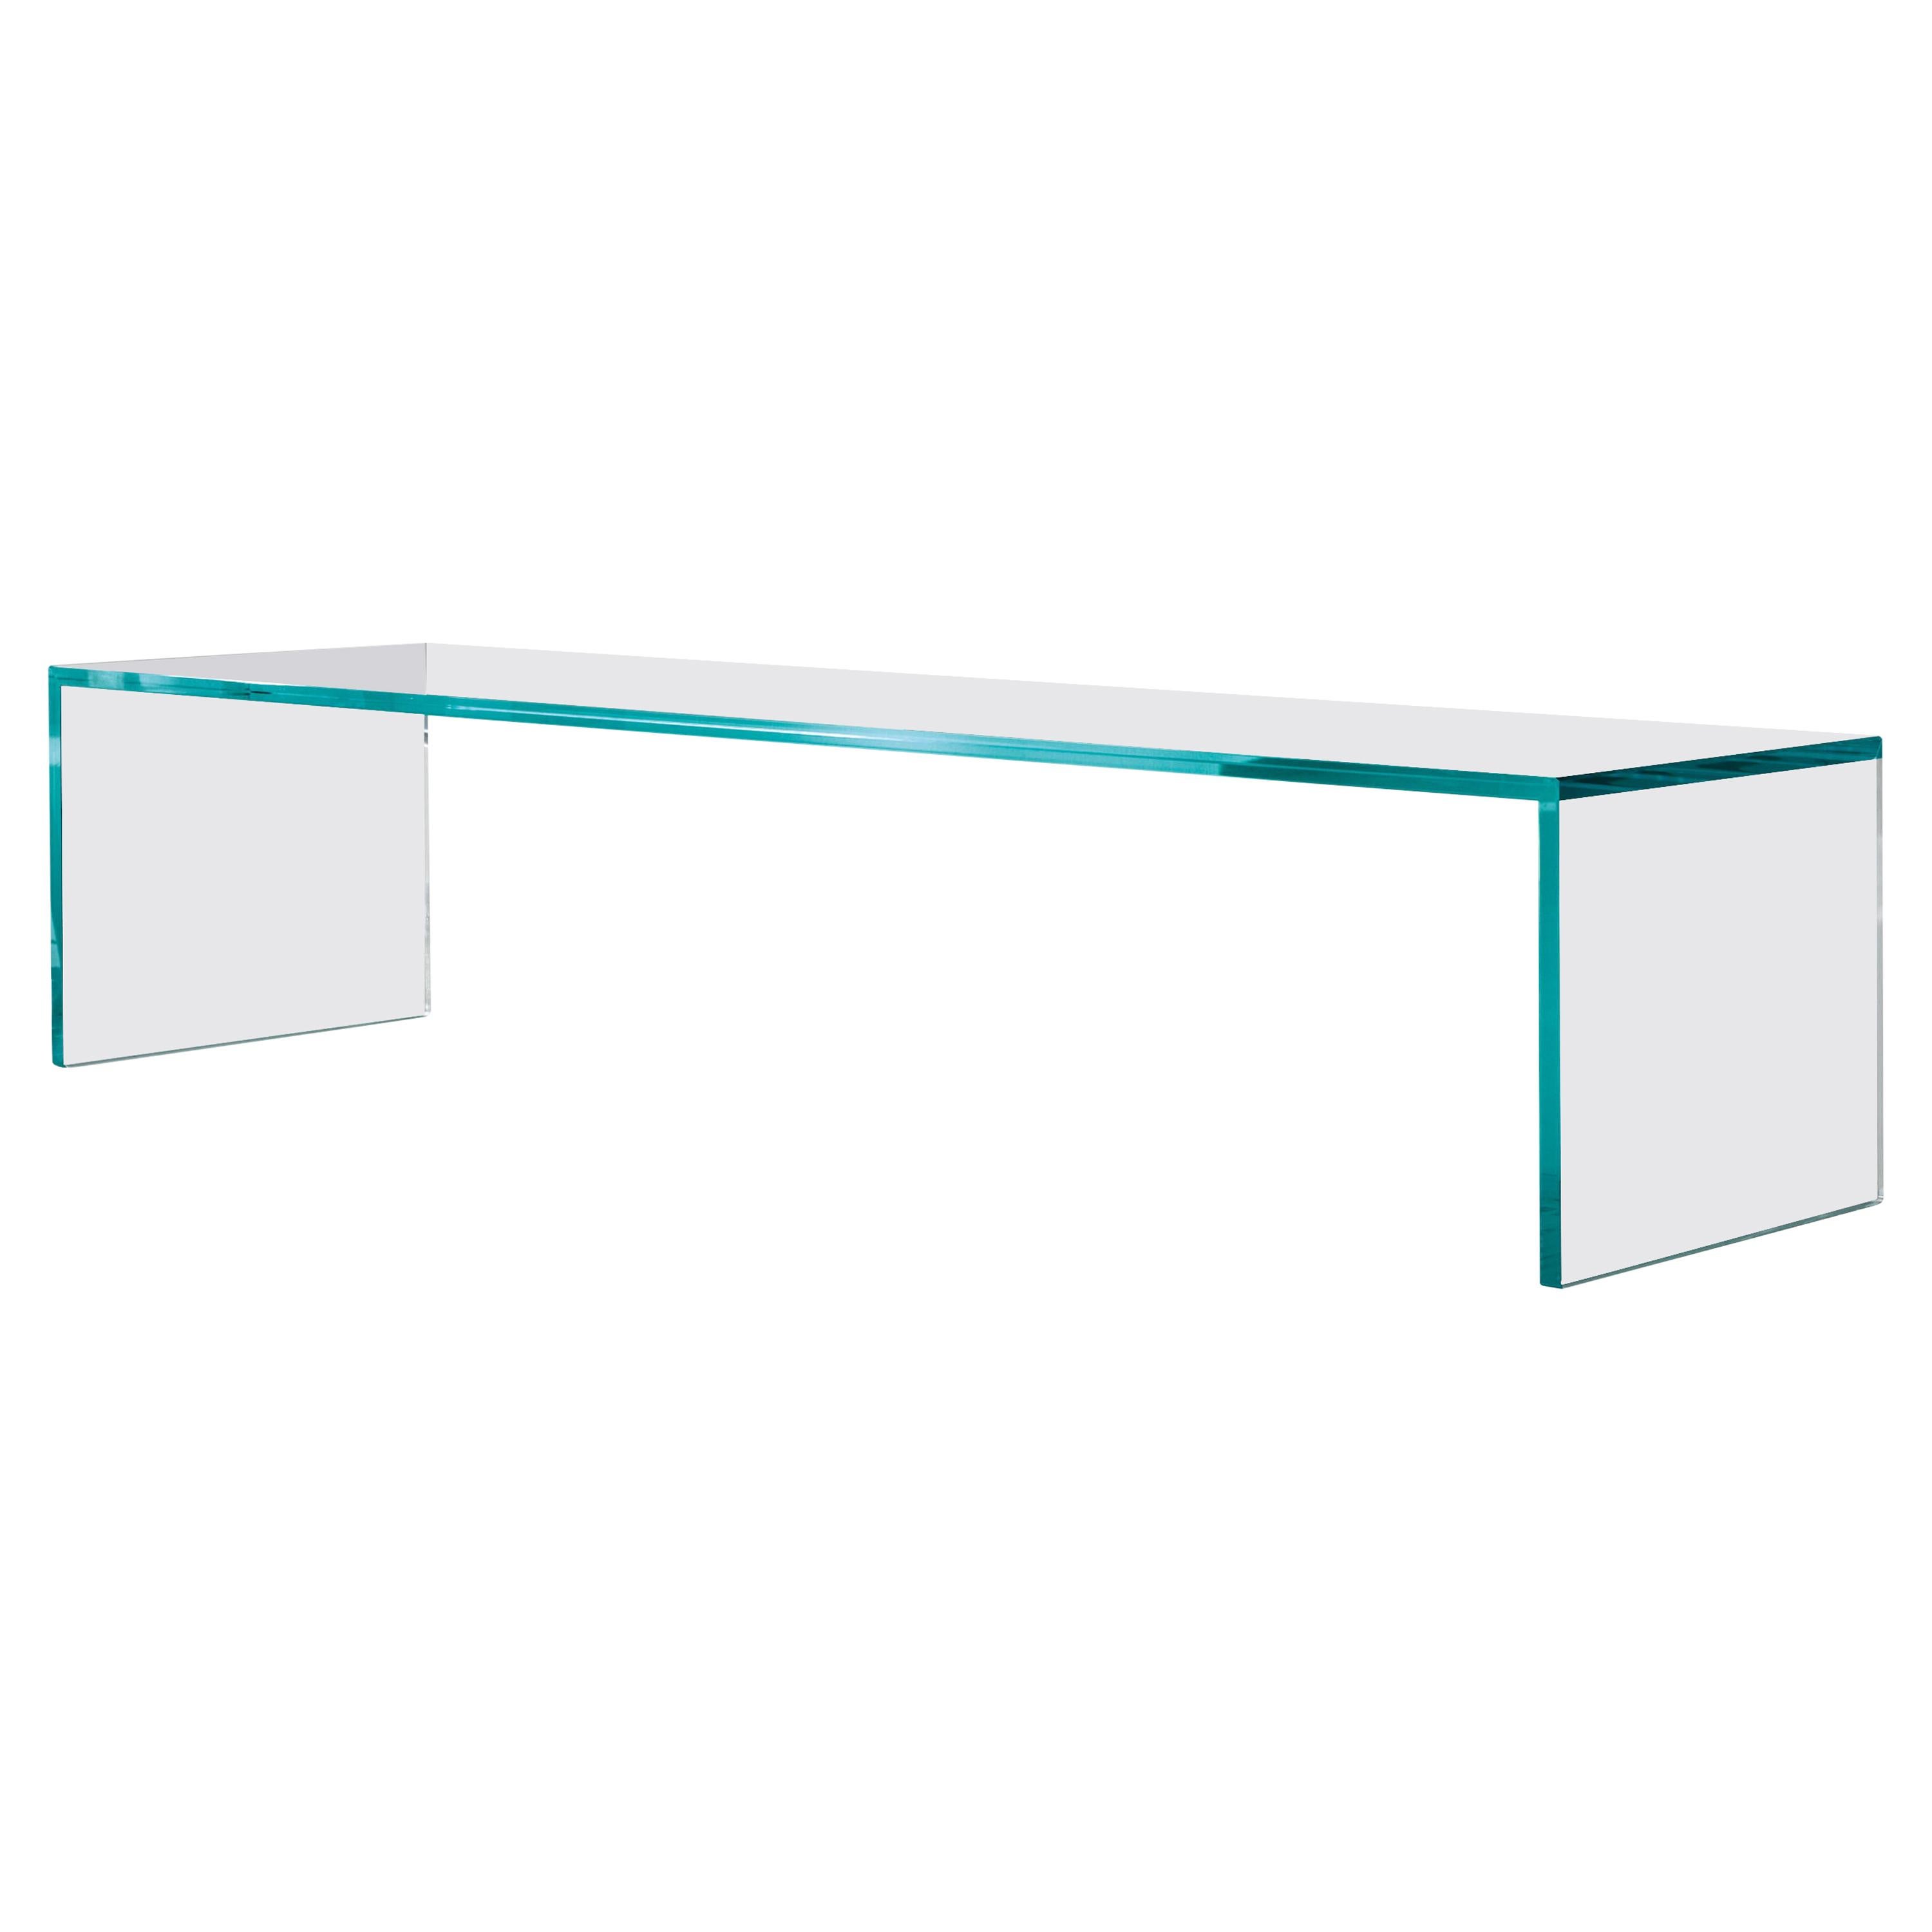 Capo Horn Glass Coffee Table, Designed by M.U, Made in Italy